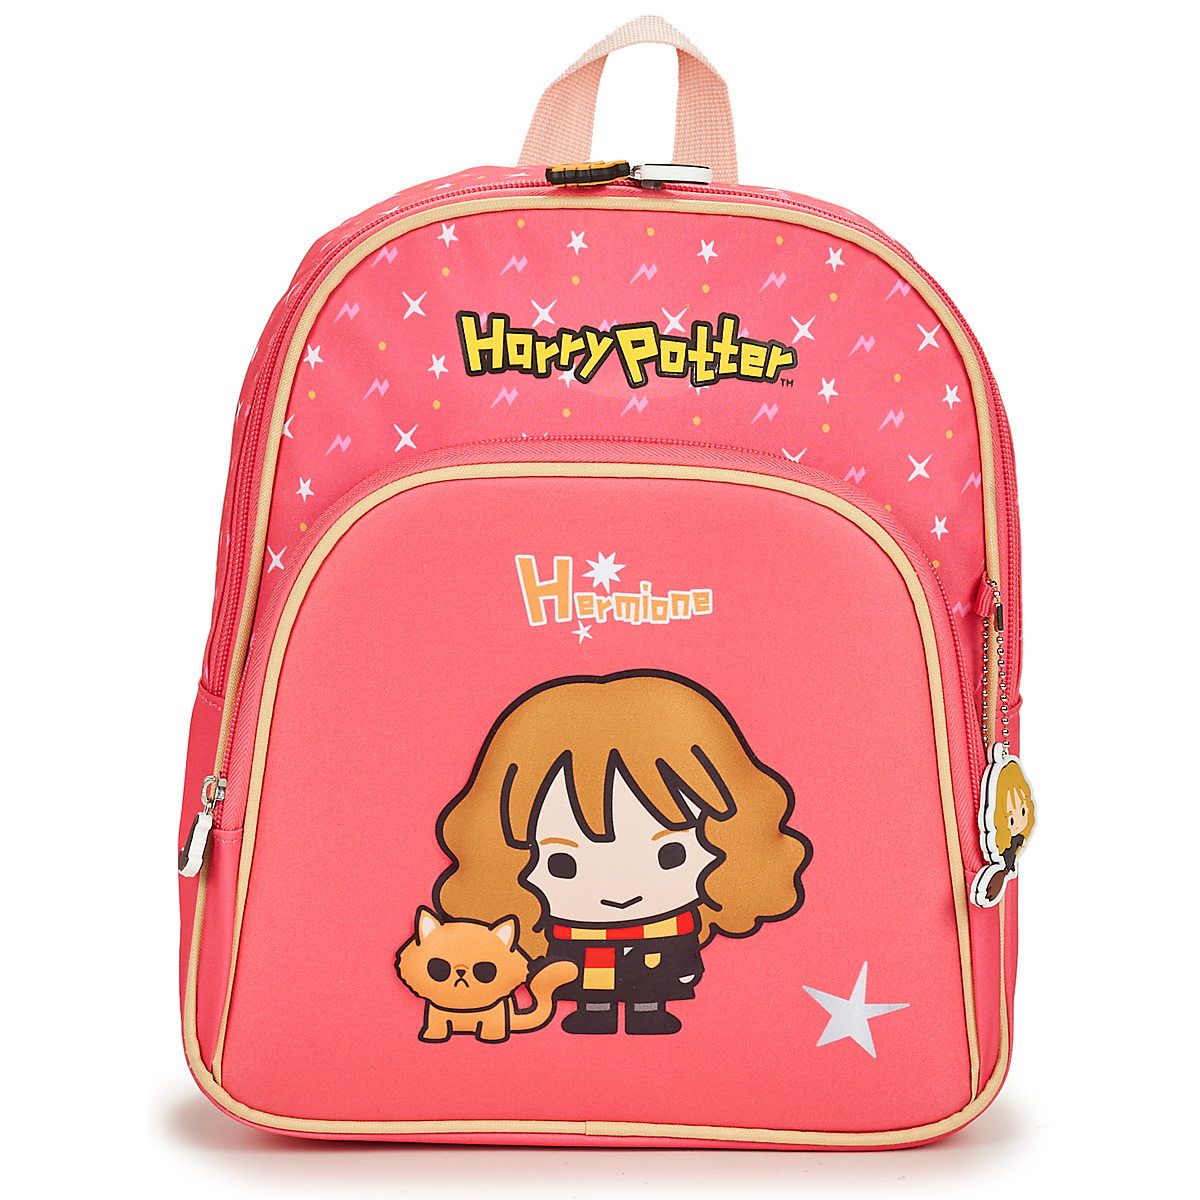 Back To School Rose CHIBI HERMIONE 25 CM kCpzcOHD